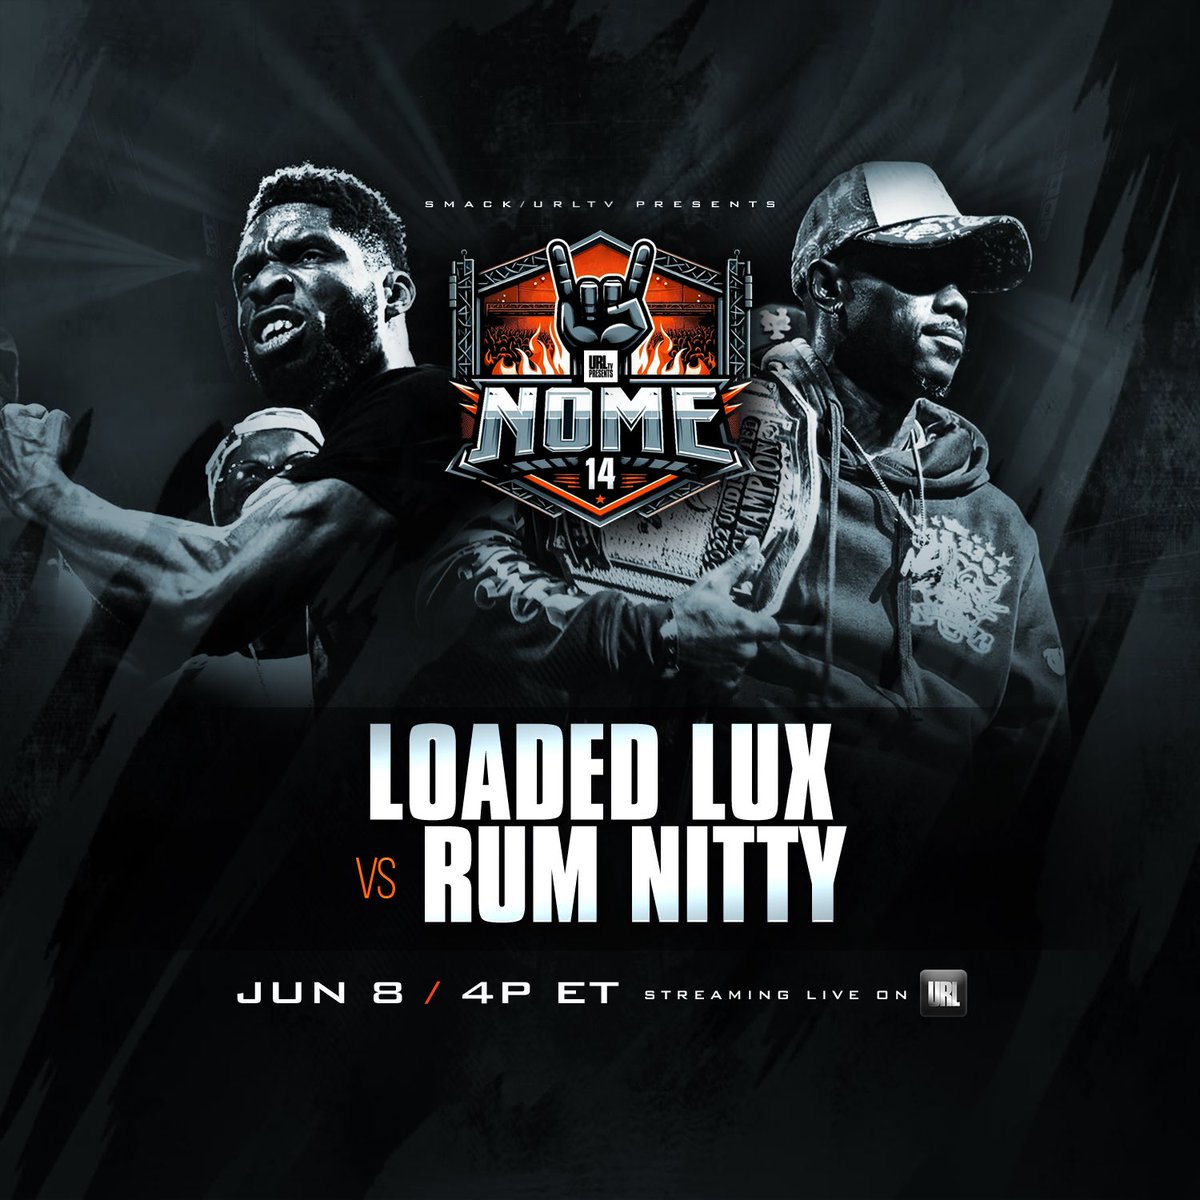 NOME 14! Night of Main Events | June 8th, 4PM ET. 🔗 Get your PPV access now at urltv.tv and witness history unfold. #youcantcopyrespect